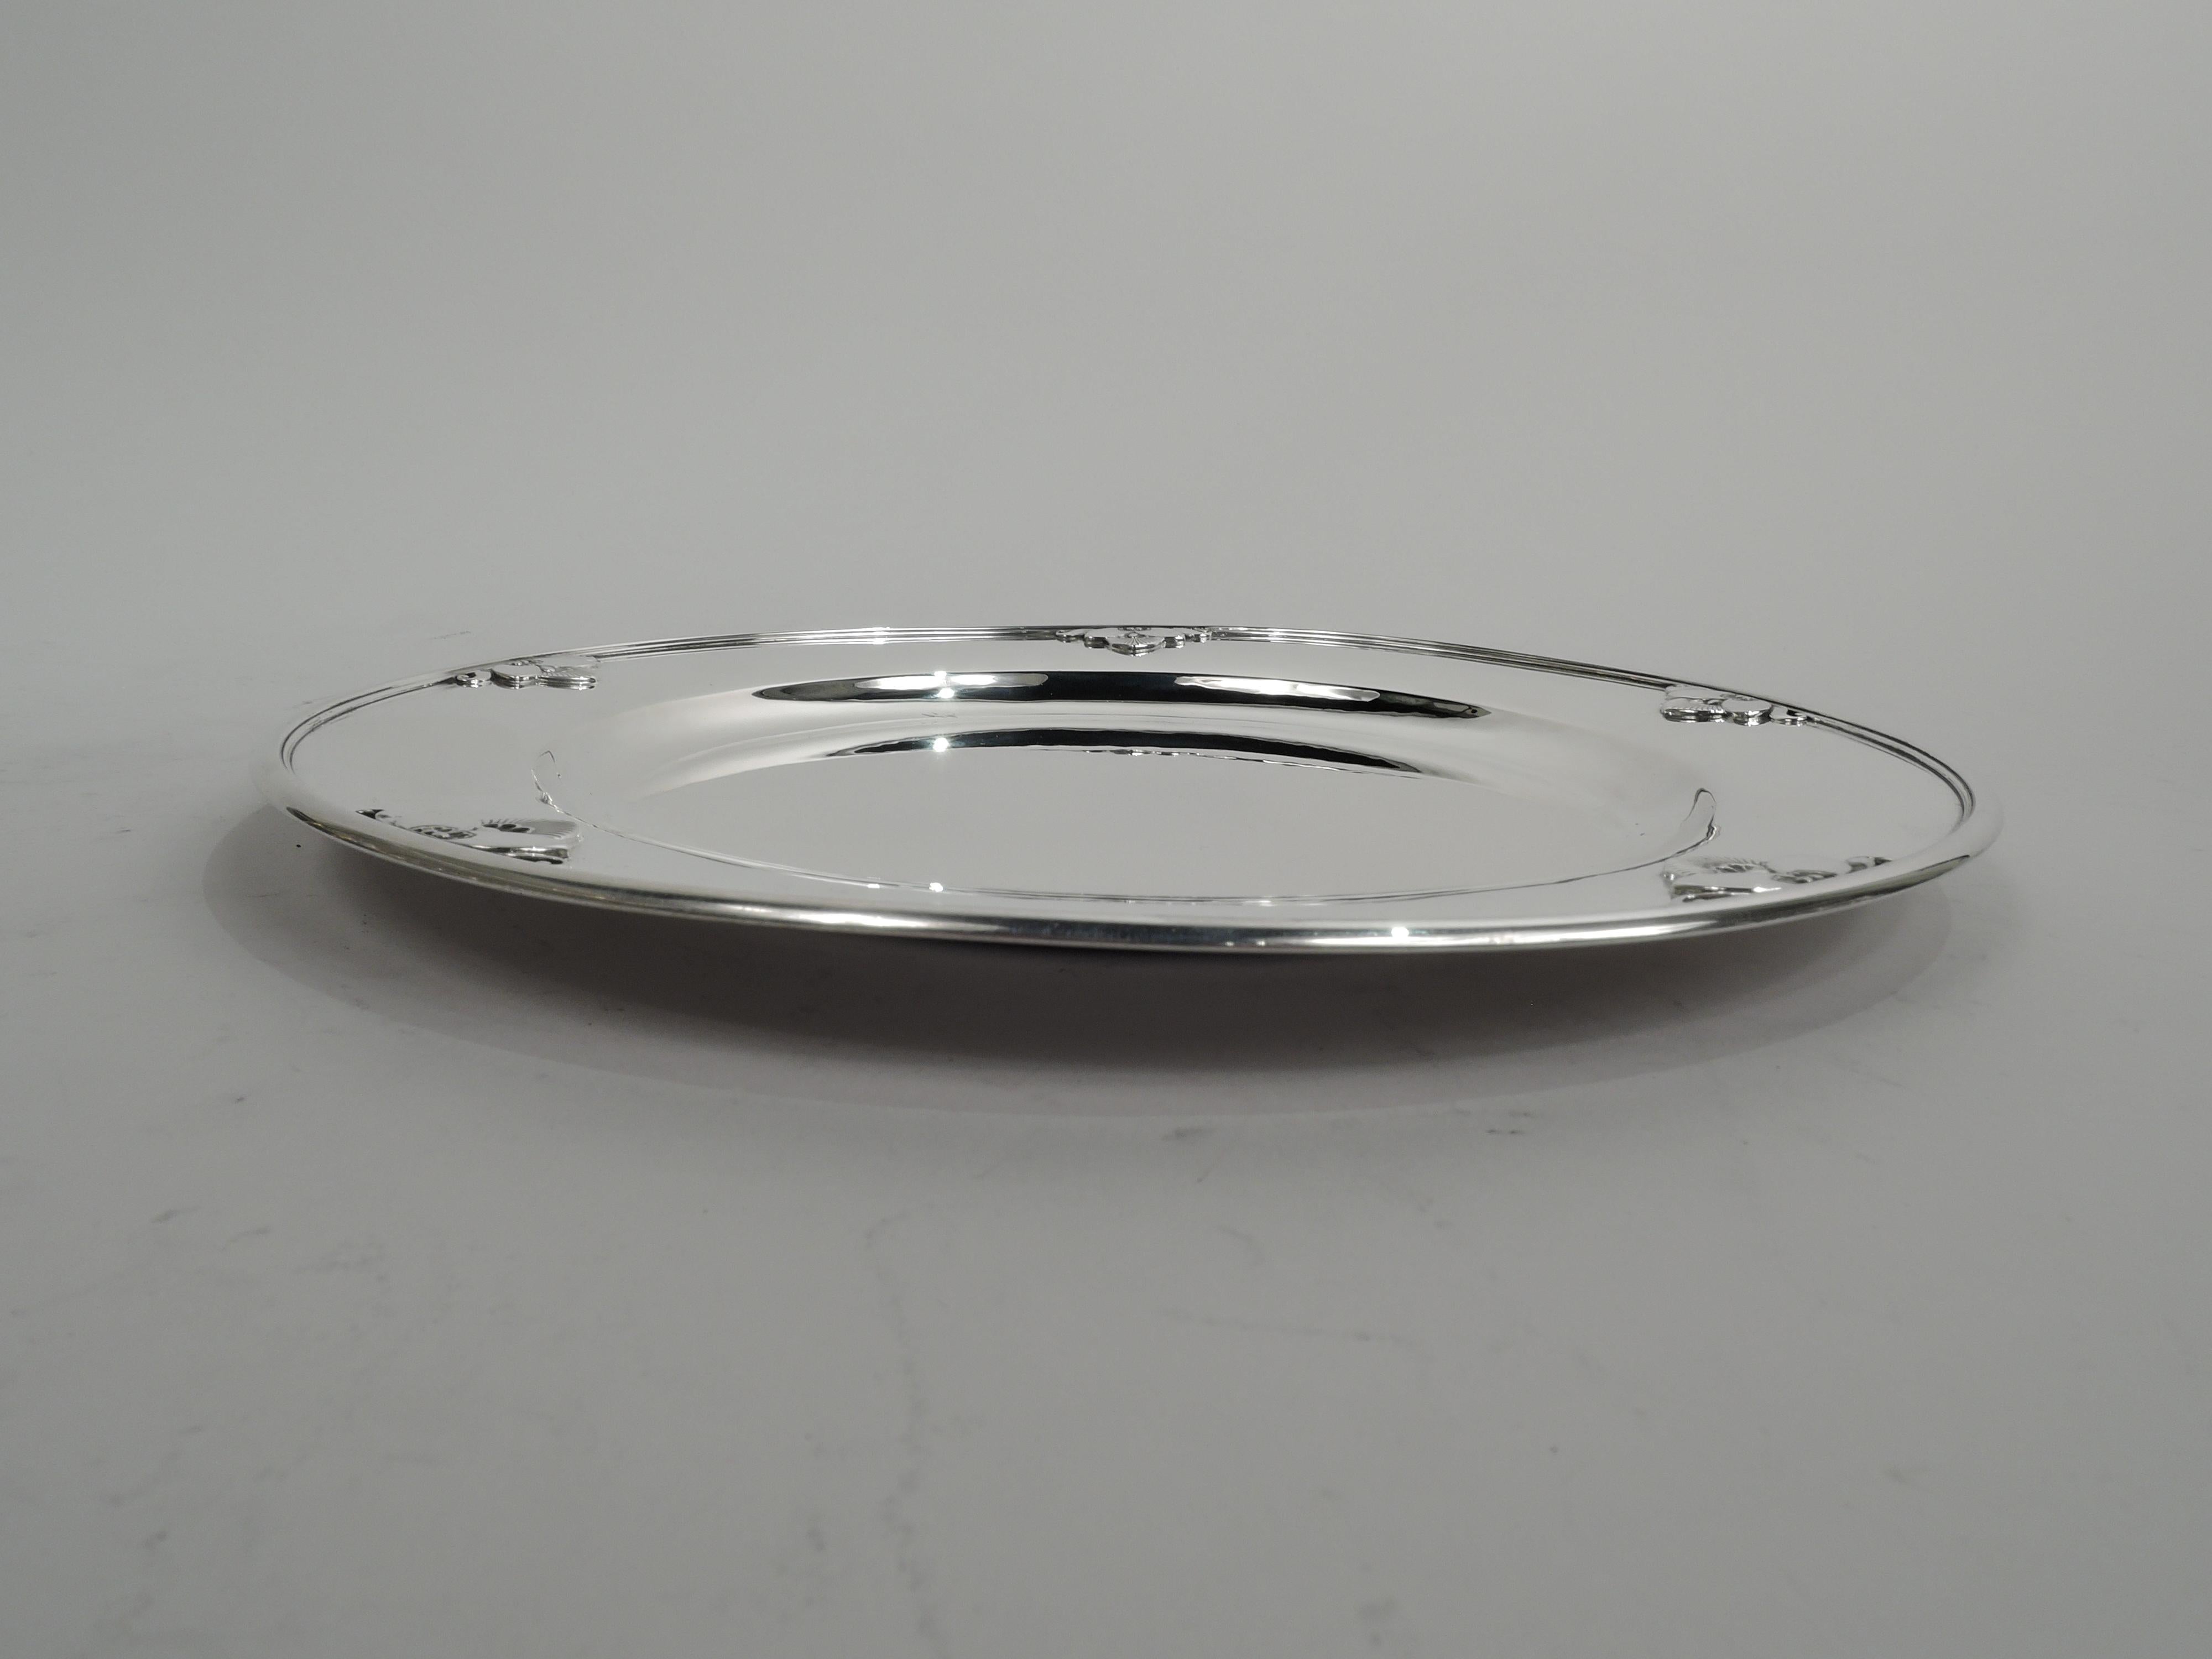 Cactus sterling silver dinner plate charger. Made by Georg Jensen in Copenhagen. Round well and sloping shoulder. Applied to rim are stylized cacti set in leaves between scrolls. A gorgeous piece in the historic pattern designed by Gundorph